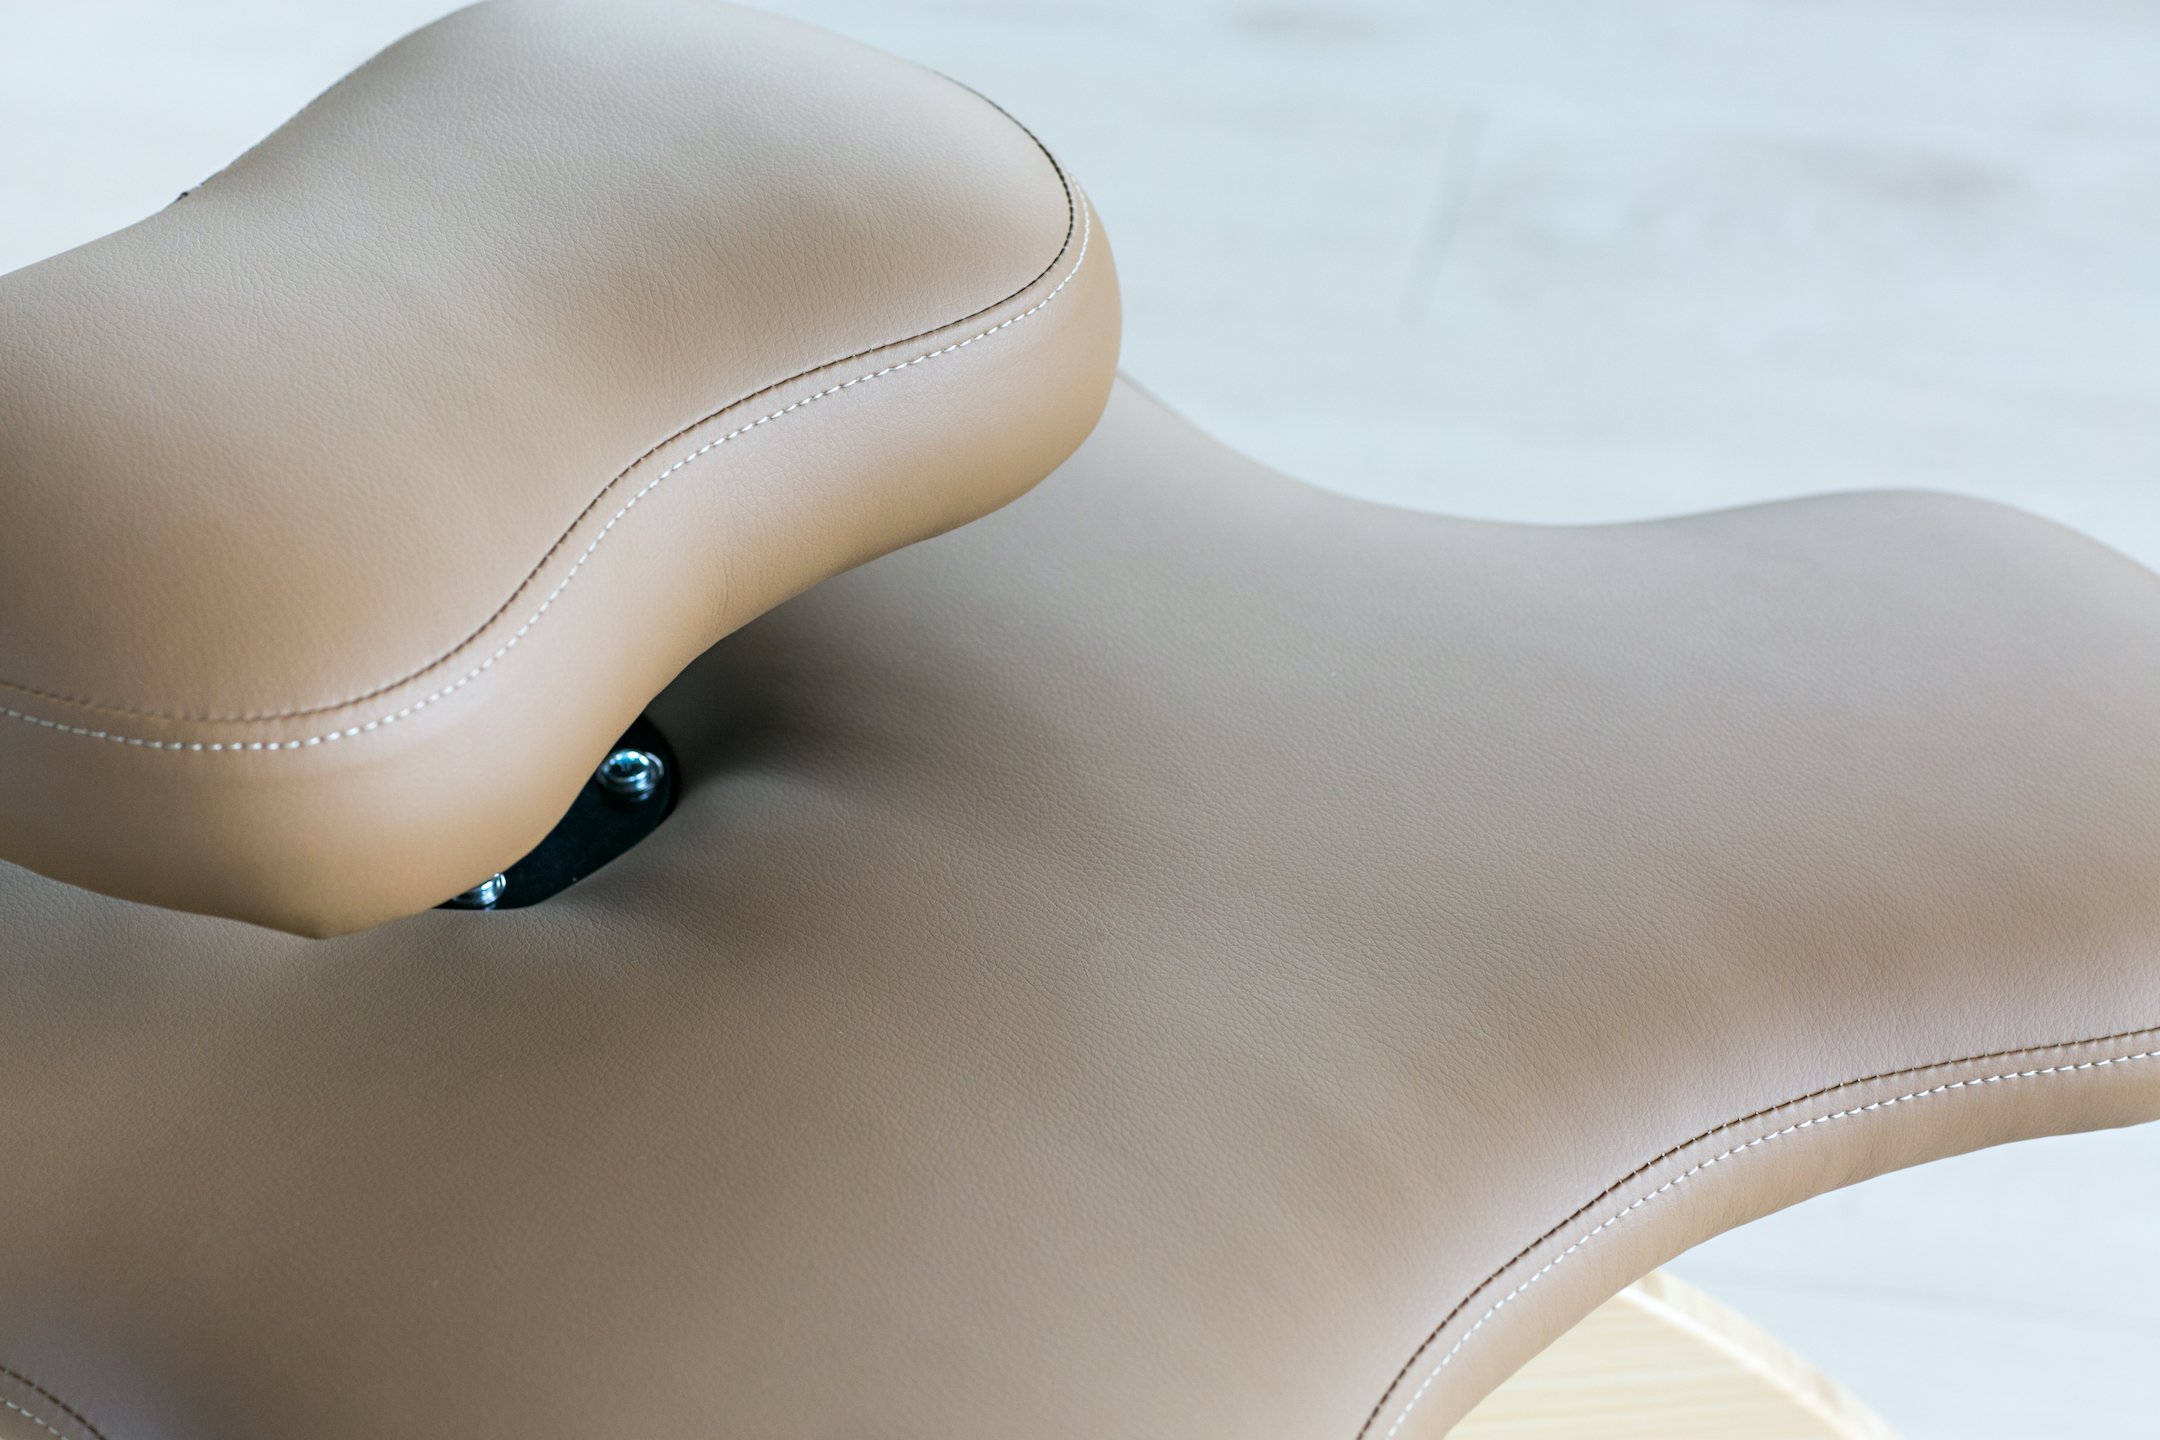 Soul Seat - ☁️ Your dream chair is here! A bi-level seat that allows you to  sit crisscross applesauce while you work. Here in Chalk vegan leather from  Ultrafabrics.